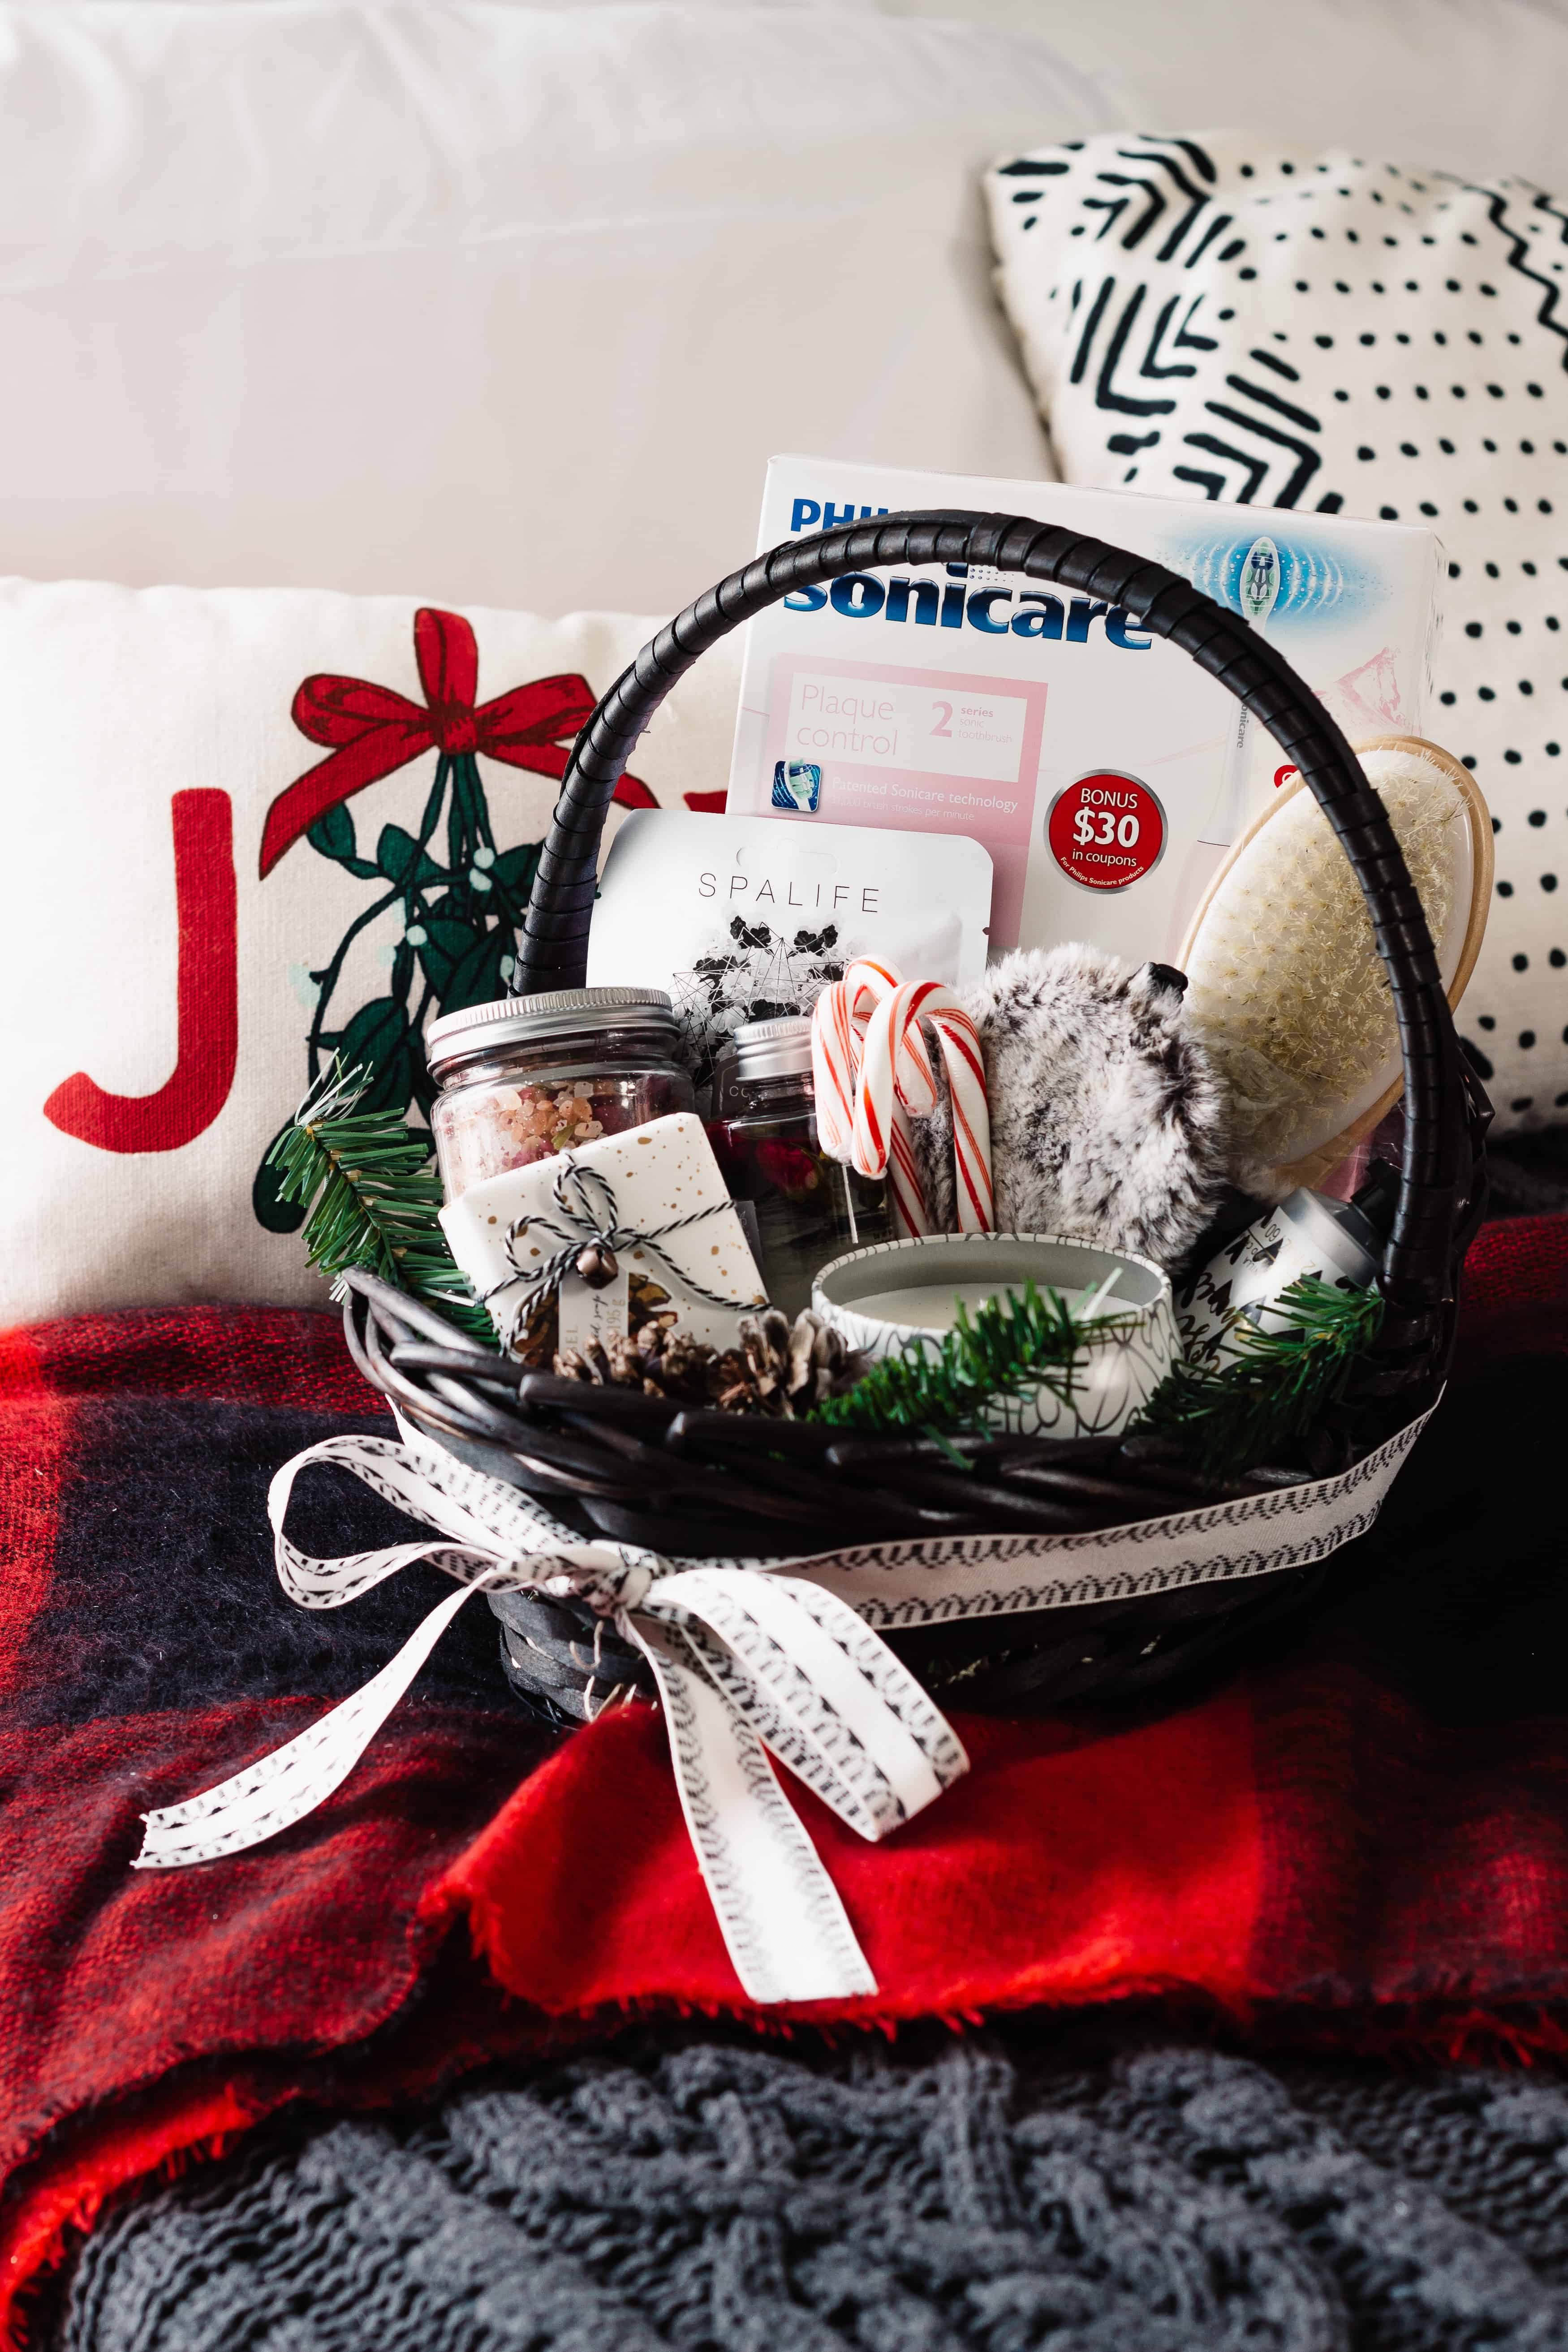 Gift For Mom: DIY Winter Beauty Gift Set. The perfect Christmas gift for mom! - Hot Beauty Health #ad #giftguide #giftsformom #beautygifts #PhilipsSonicare @PhilipsSonicare